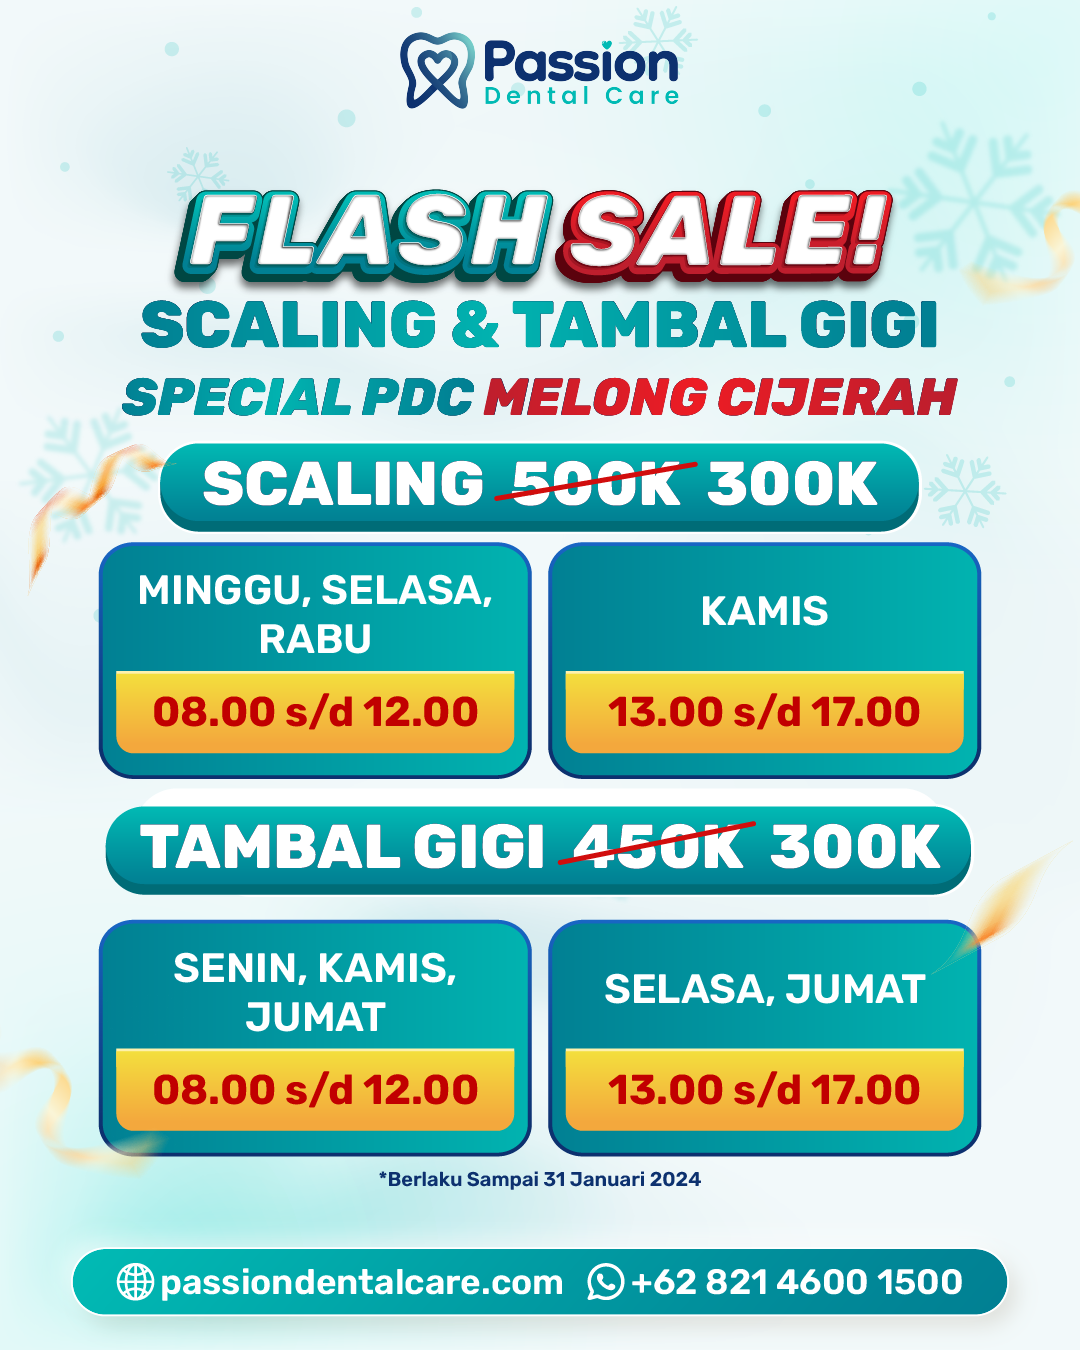 Flashsale Melong | Passion Dental Care